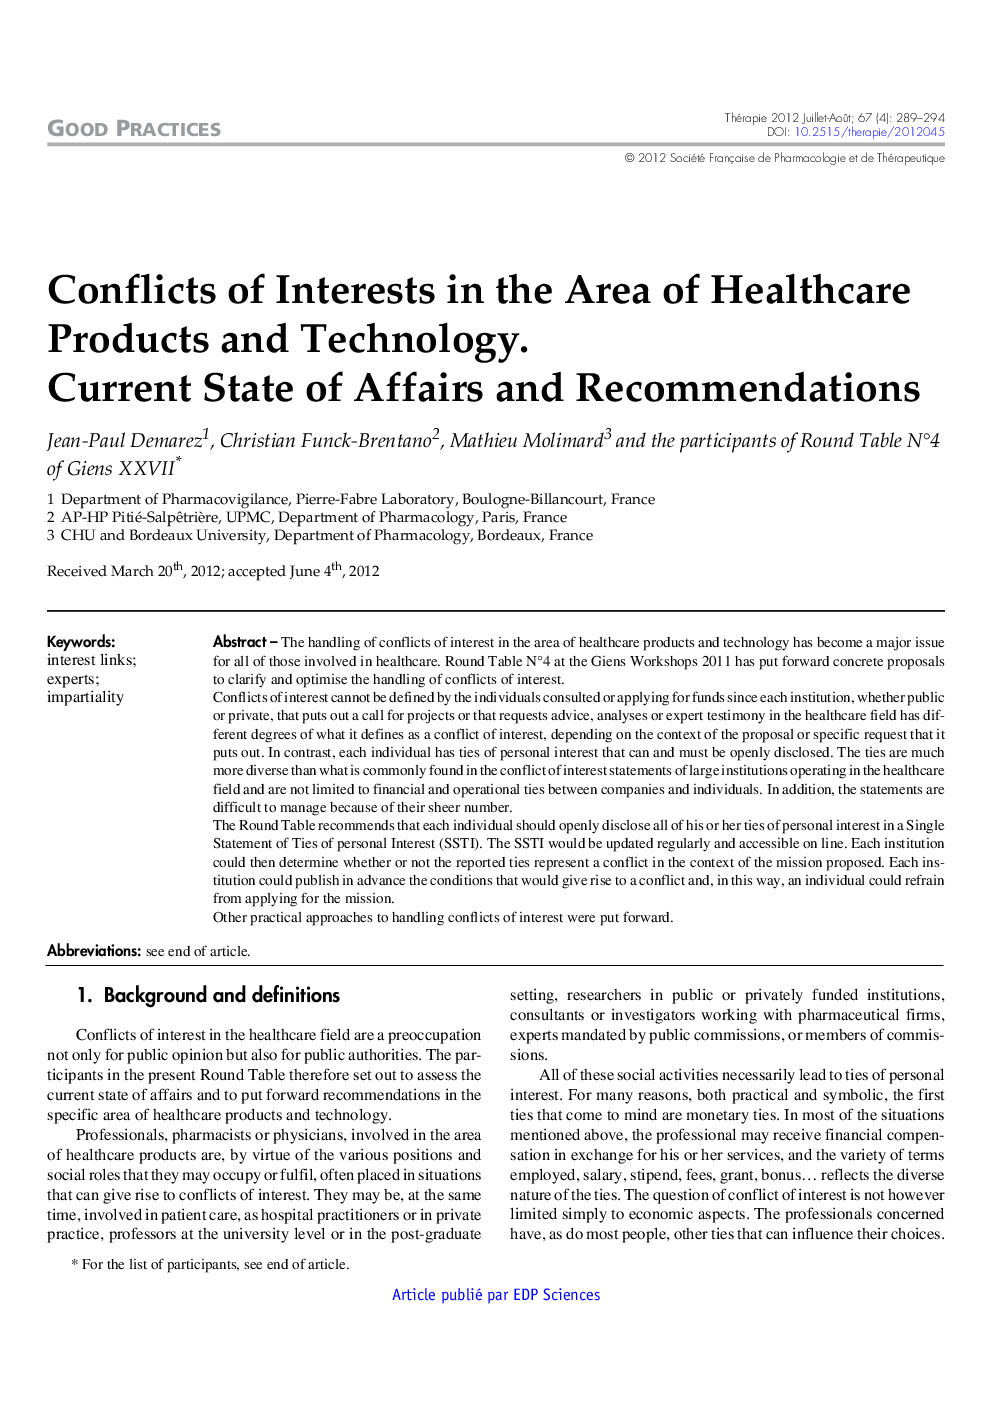 Conflicts of Interests in the Area of Healthcare Products and Technology. Current State of Affairs and Recommendations